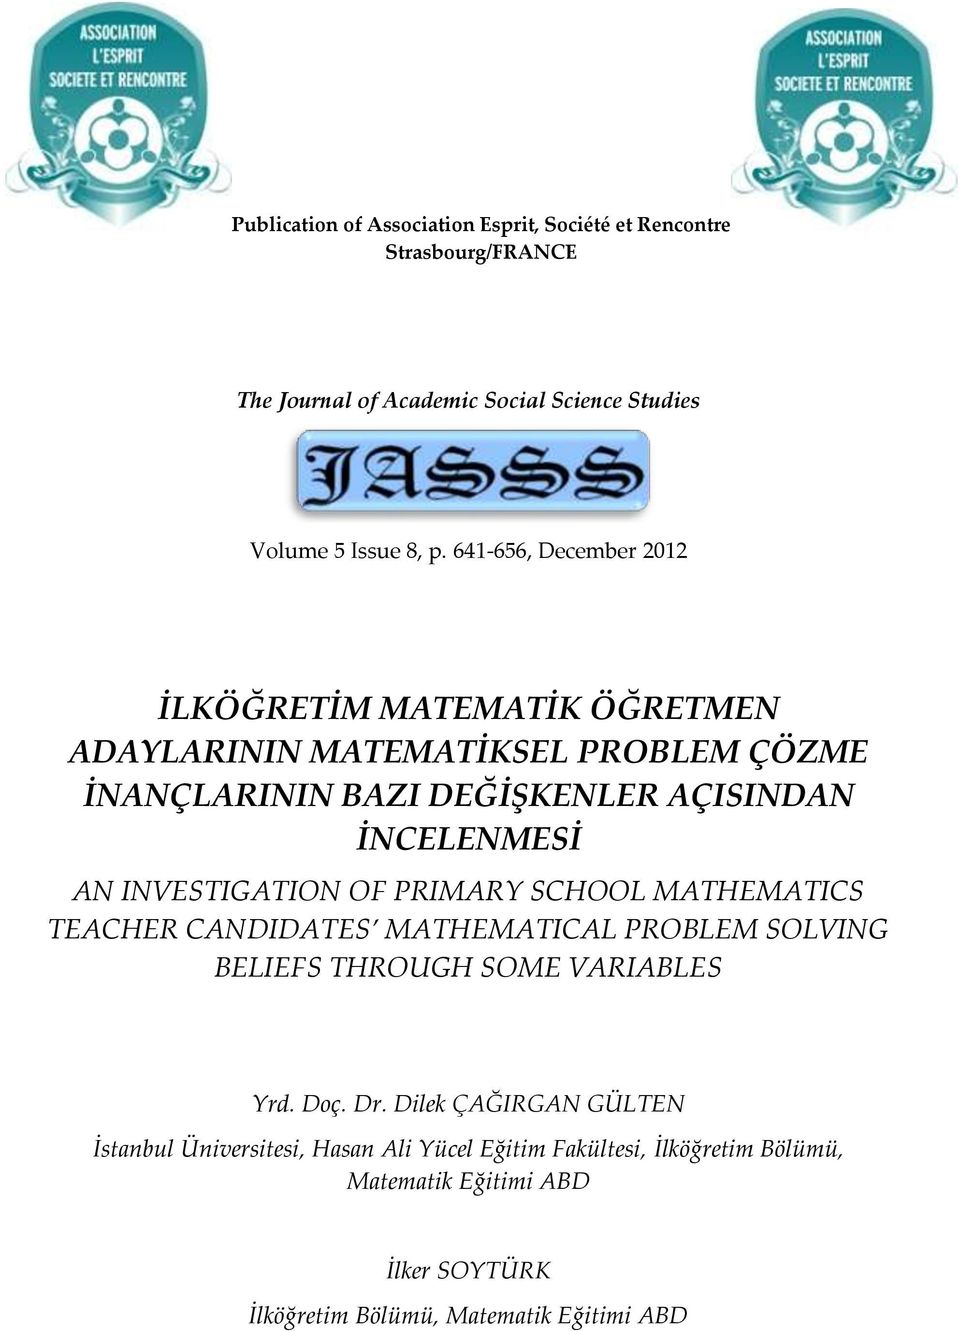 INVESTIGATION OF PRIMARY SCHOOL MATHEMATICS TEACHER CANDIDATES MATHEMATICAL PROBLEM SOLVING BELIEFS THROUGH SOME VARIABLES Yrd. Doç. Dr.